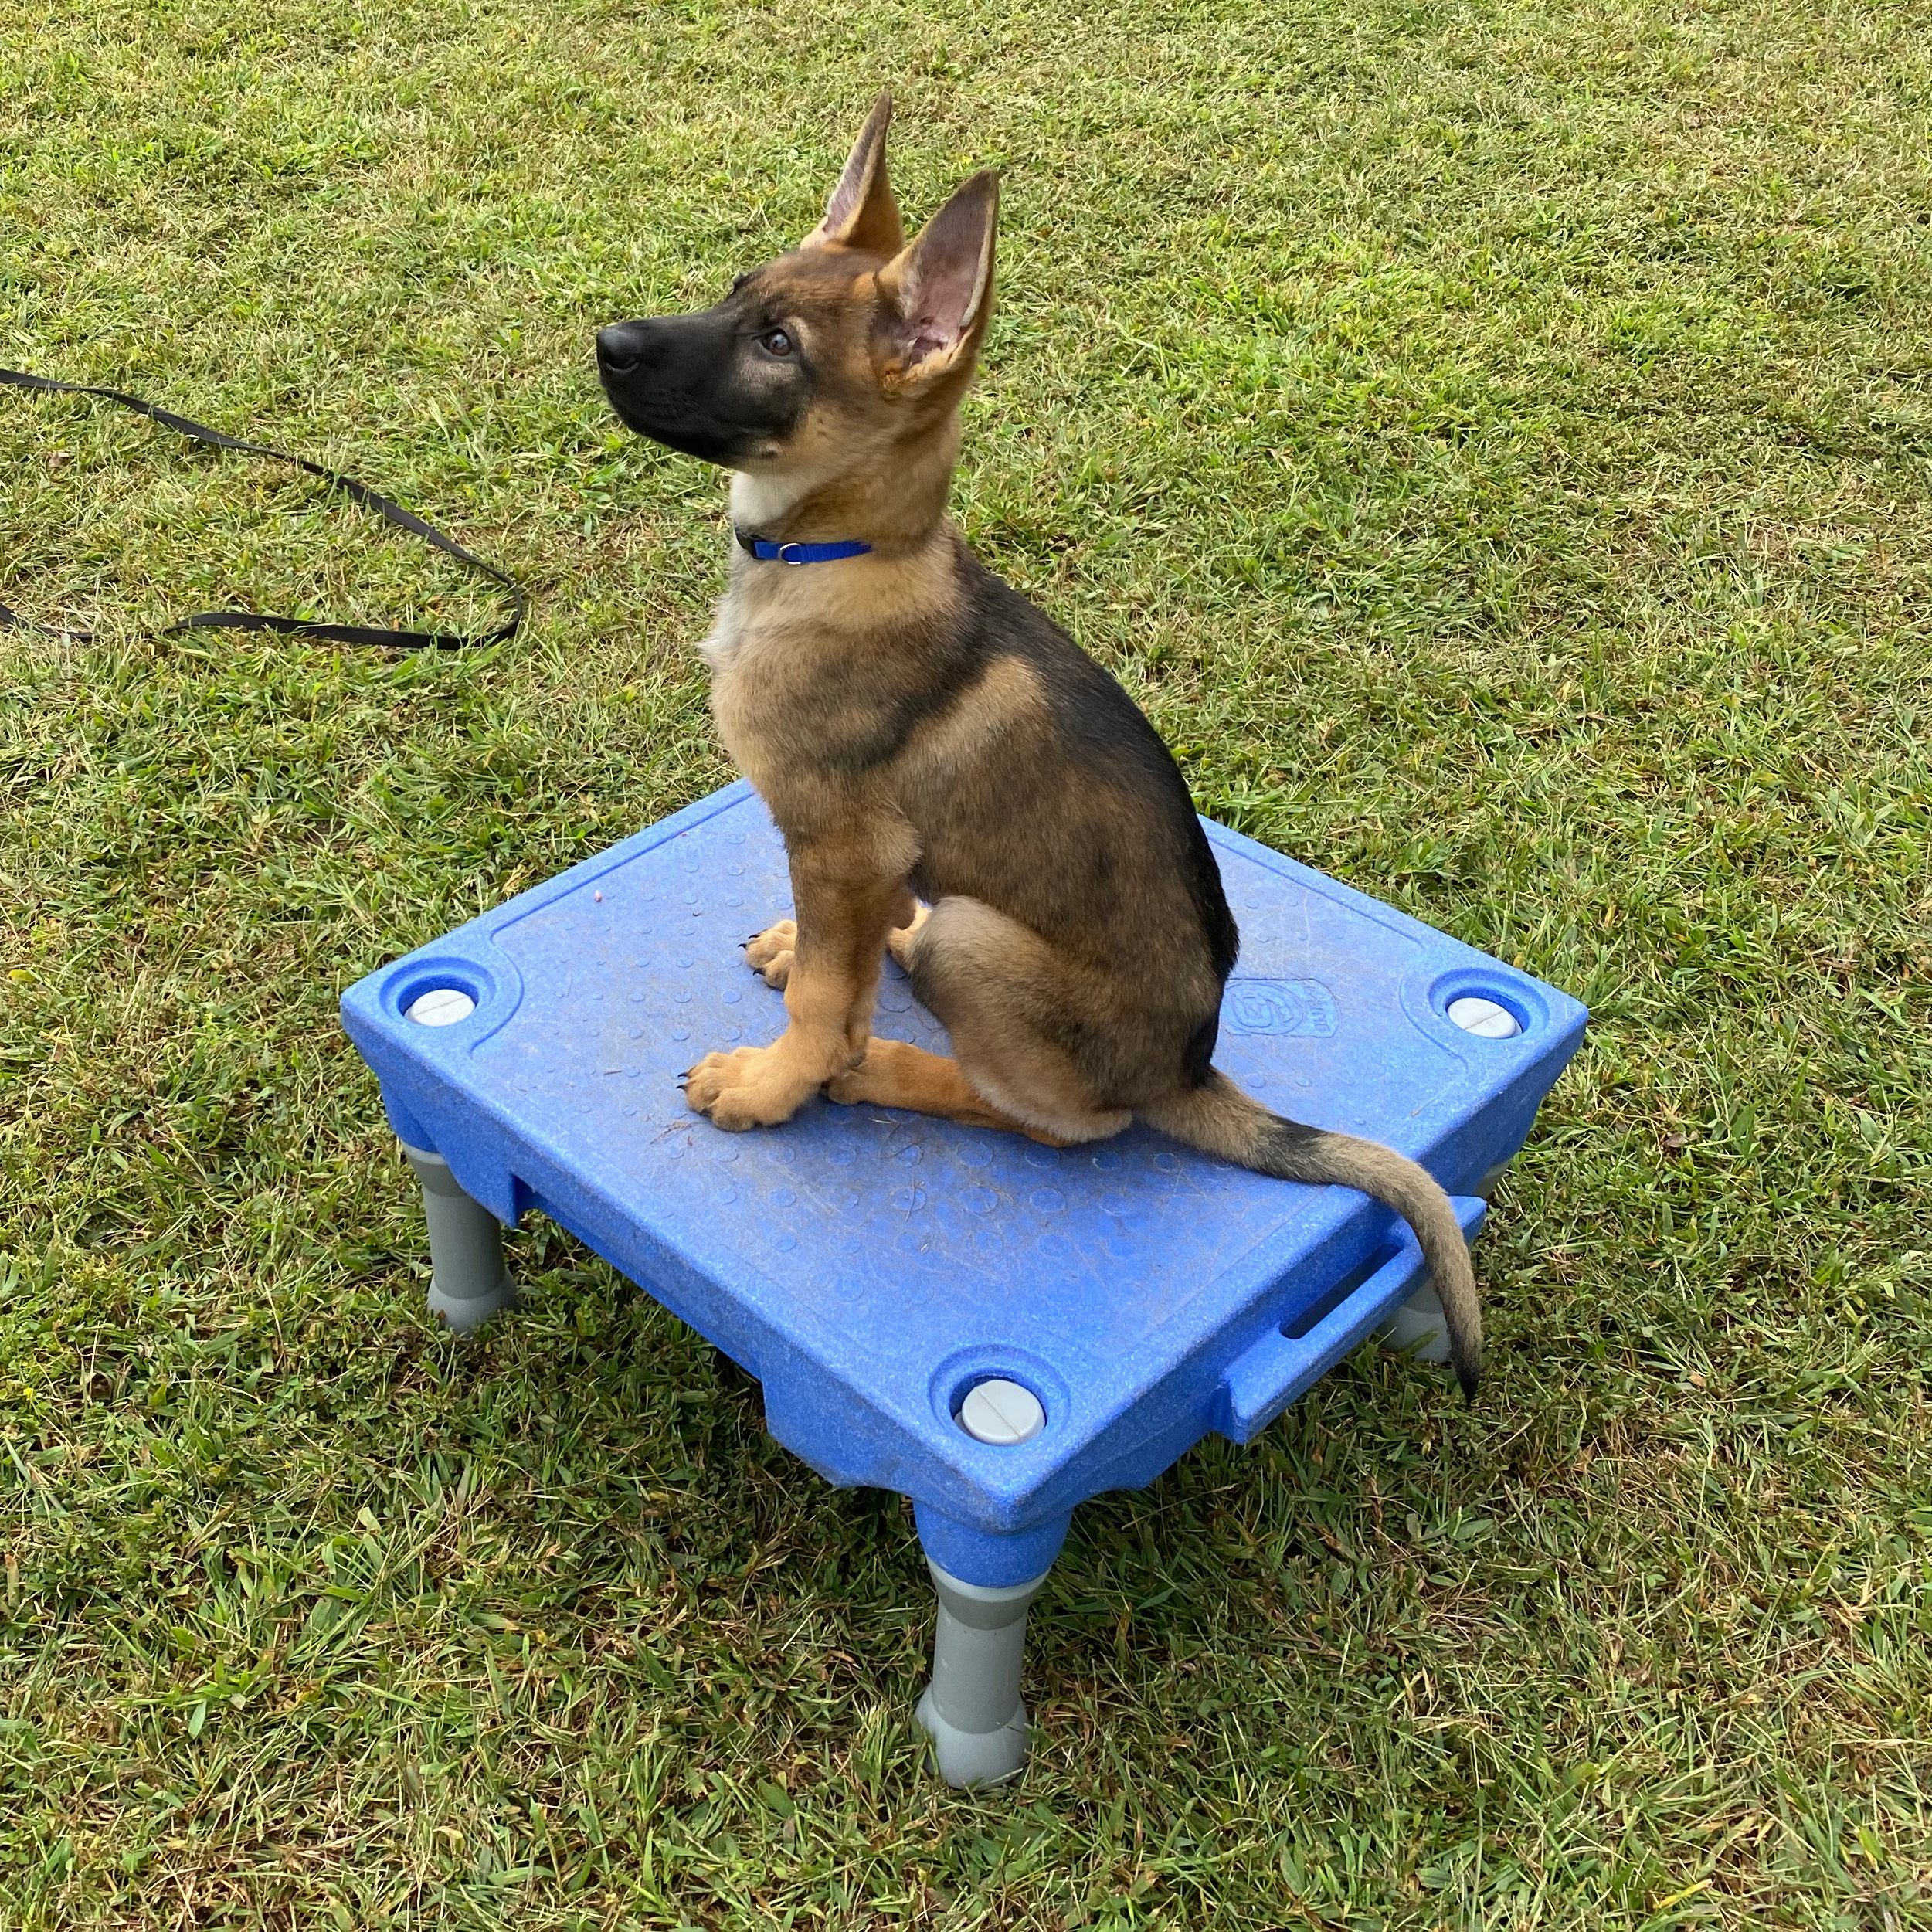 GSD Pup Doing Basic Obedience Dog Training for Voorhees, NJ